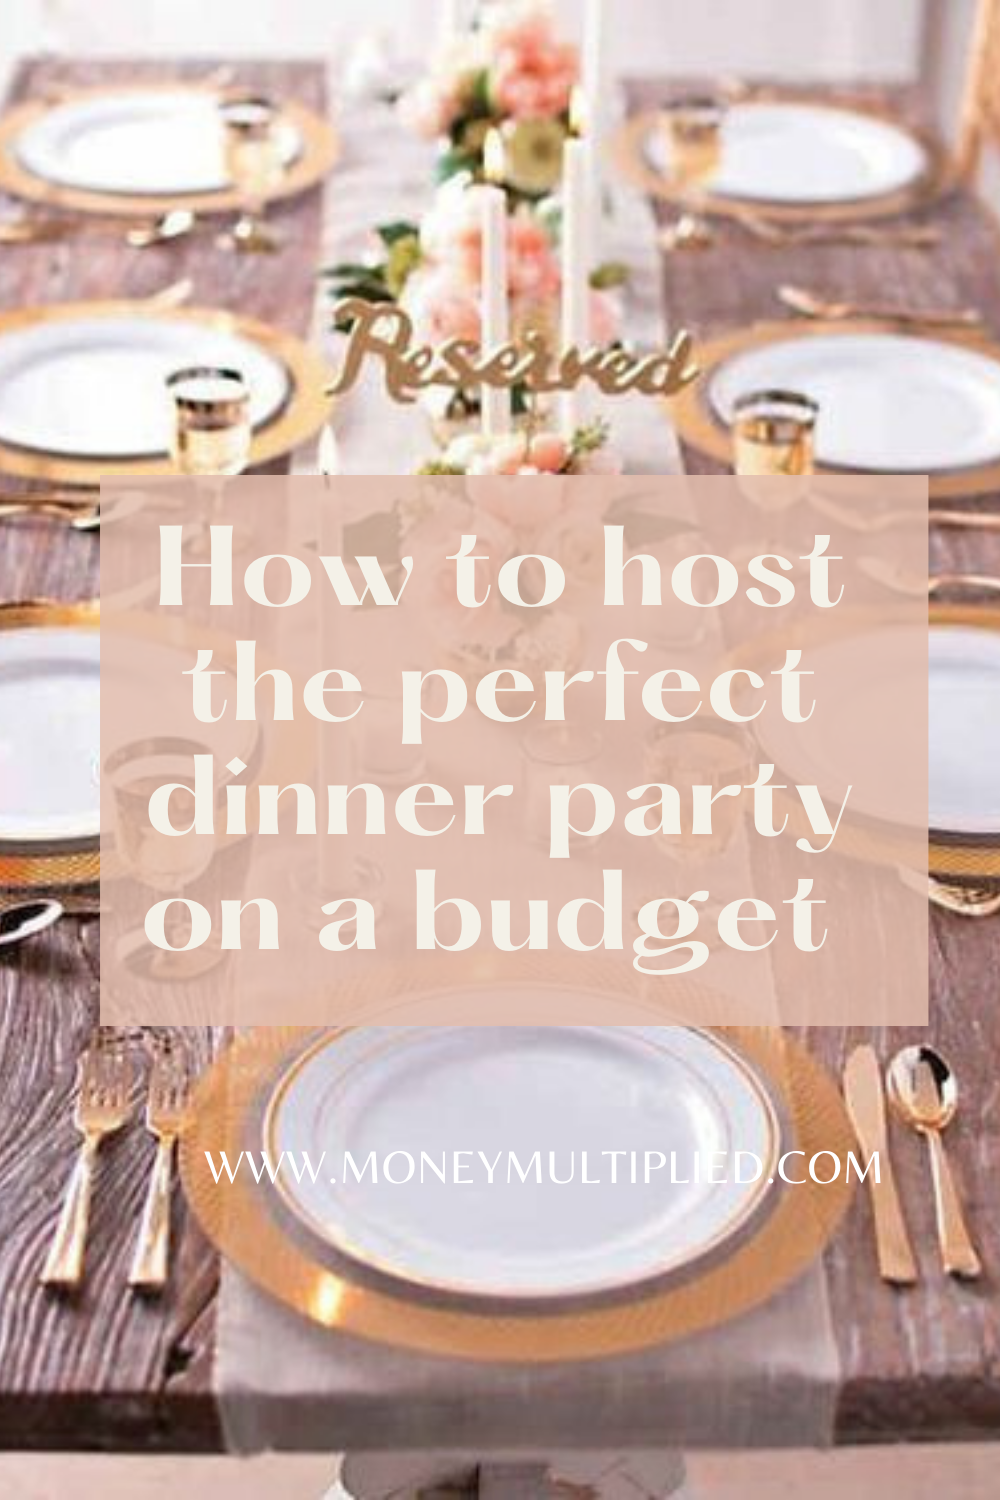 How to host a dinner party on a budget